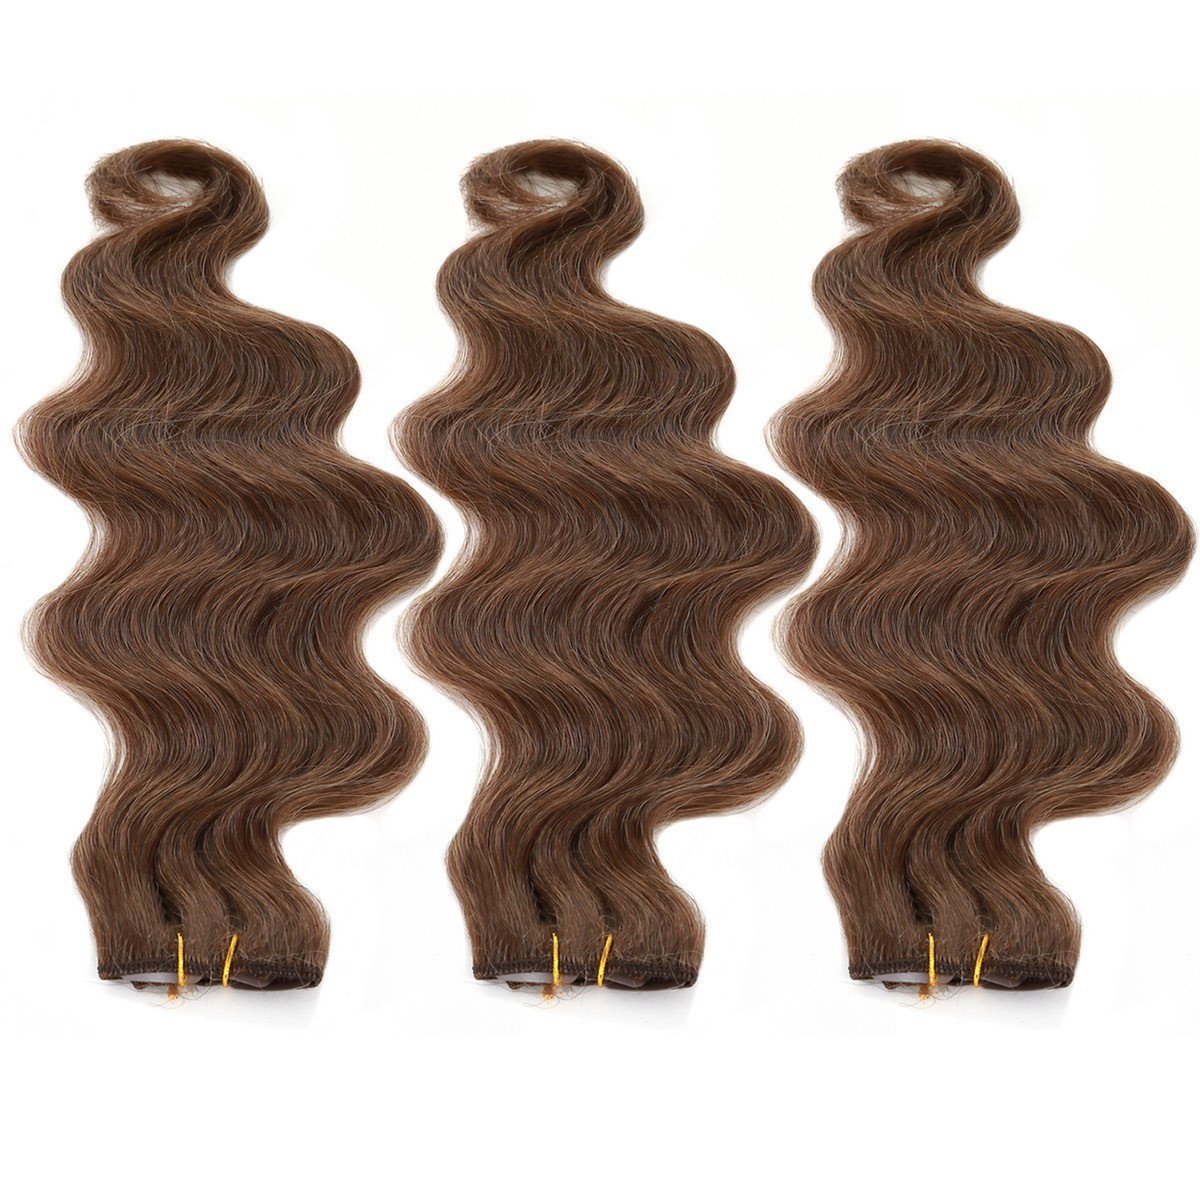 Body Wave Clip in Hair 18" 3 packs of 6 clips attached - Beauty Hair Products LtdHair Extensions